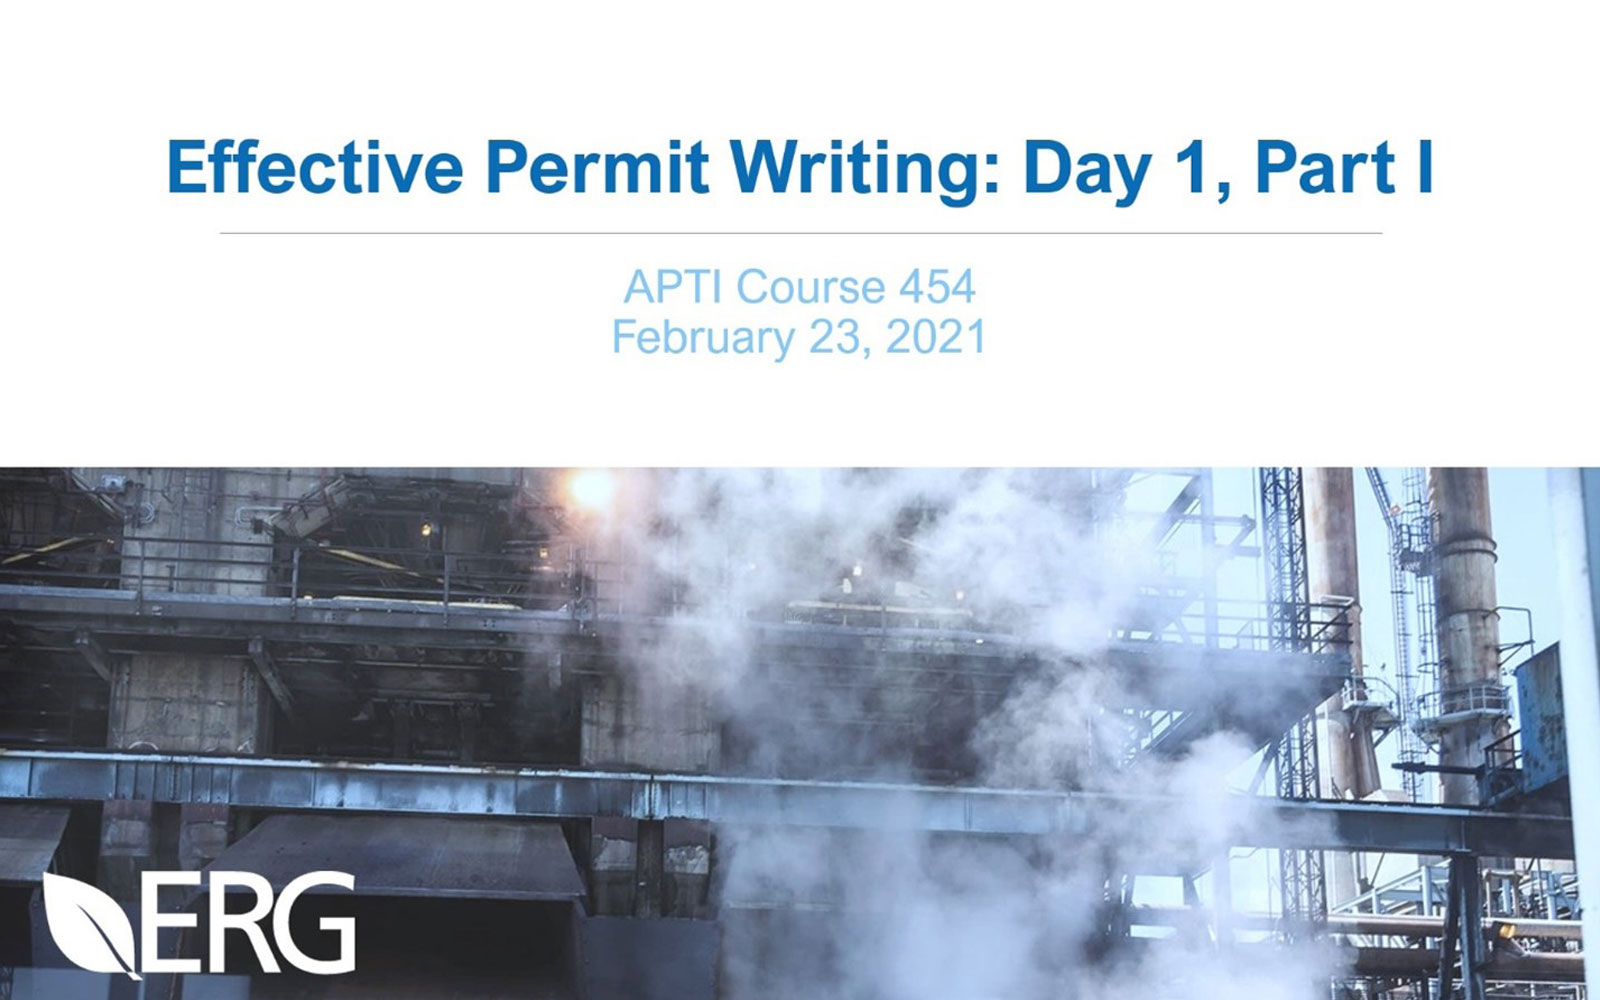 screenshot of Effective Permit Writing Course slideshow with image of hazy air